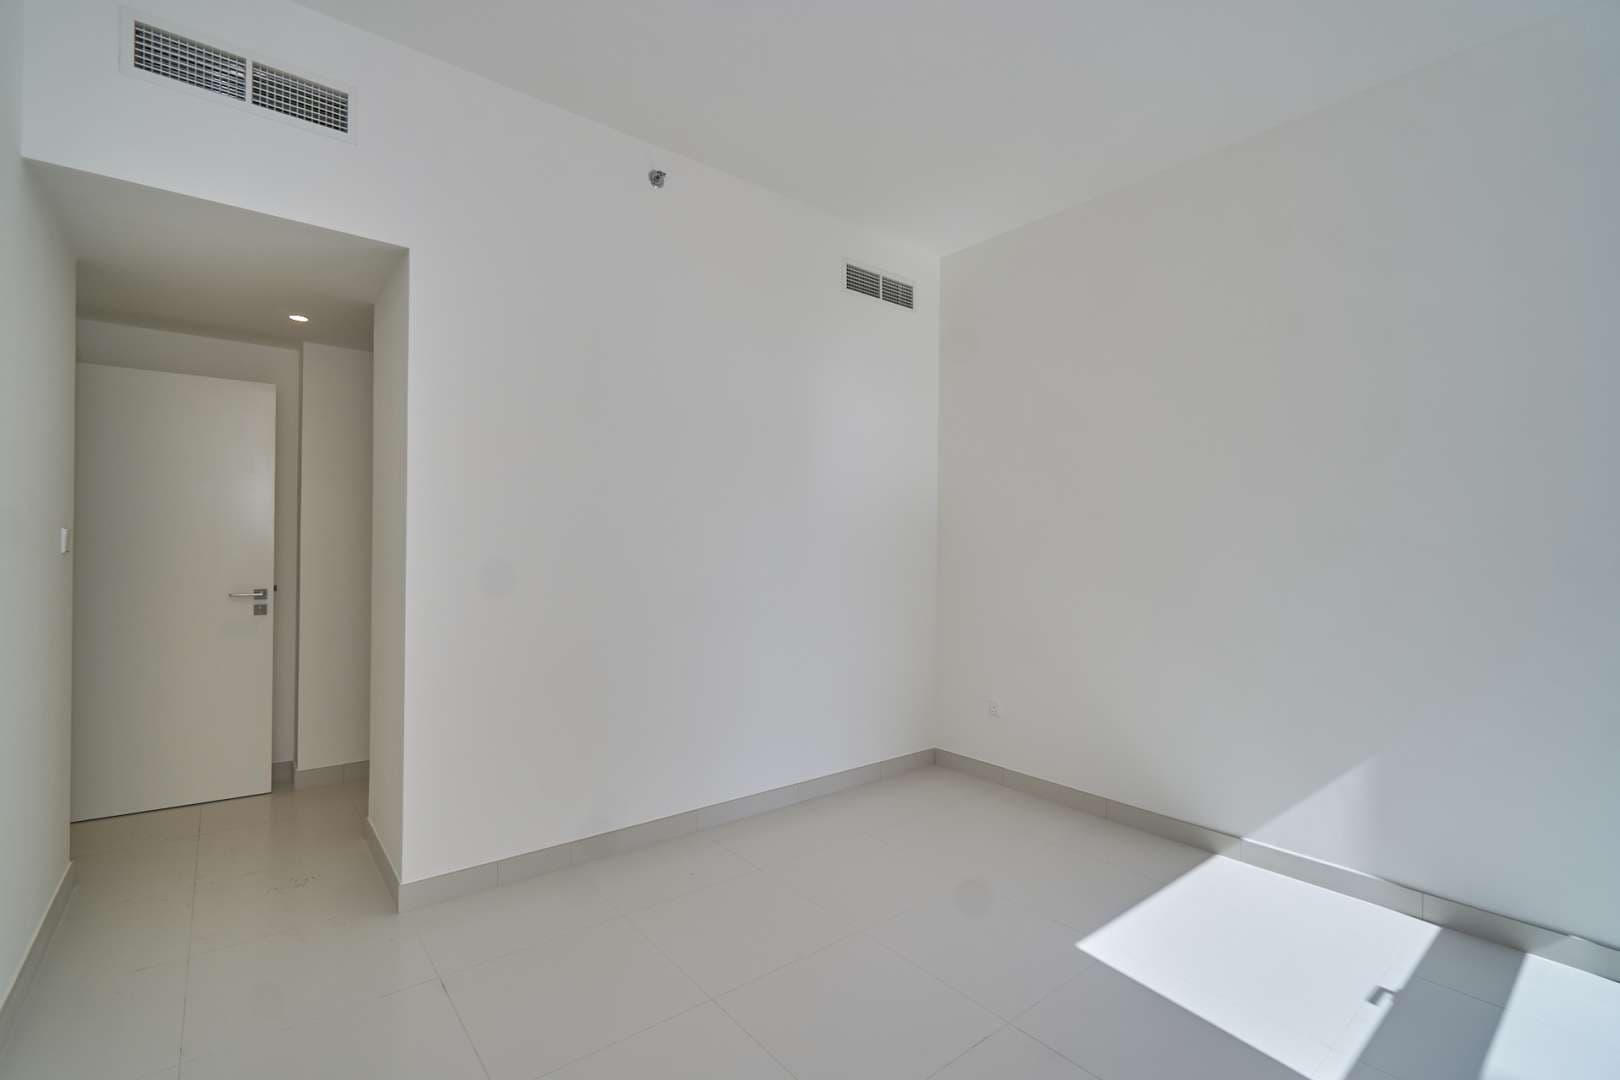 2 Bedroom Apartment For Rent Park Point Lp08887 1eb411c7bee06300.jpg